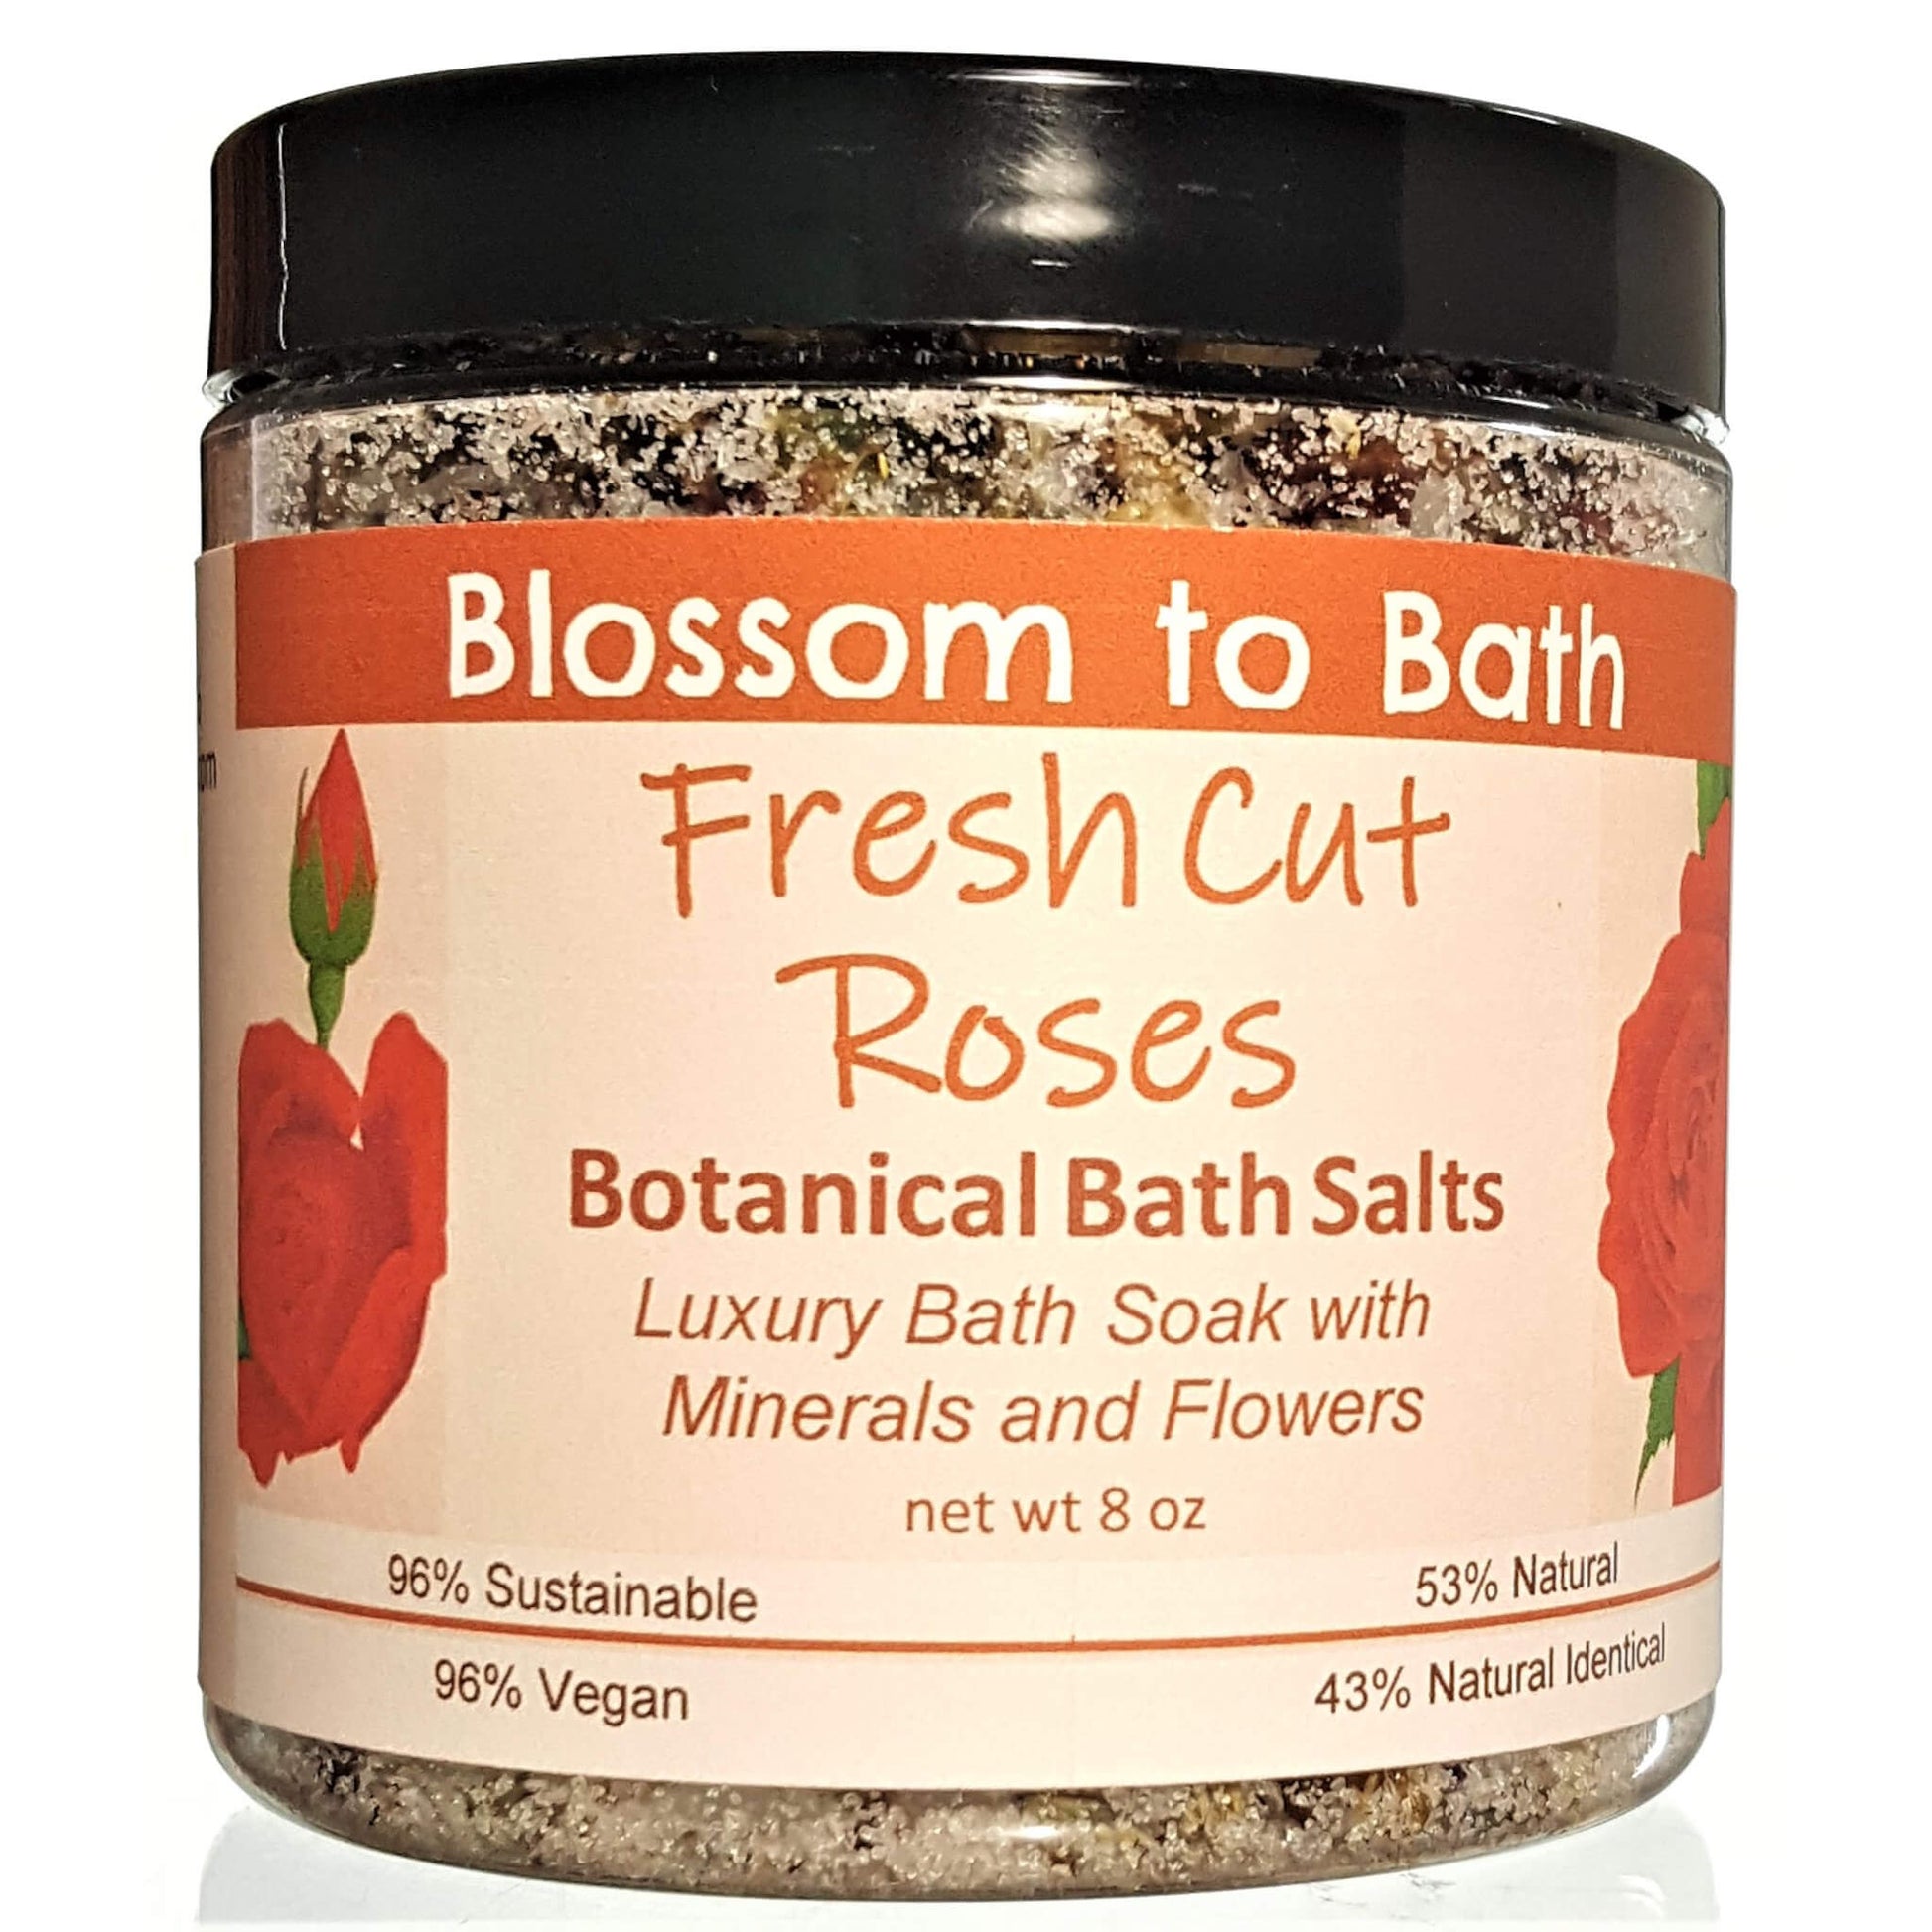 Buy Blossom to Bath Fresh Cut Roses Botanical Bath Salts from Flowersong Soap Studio.  A hand selected variety of skin loving botanicals and mineral rich salts for a unique, luxurious soaking experience  A true rose fragrance, the scent captures the splendor of a newly blossomed rose.